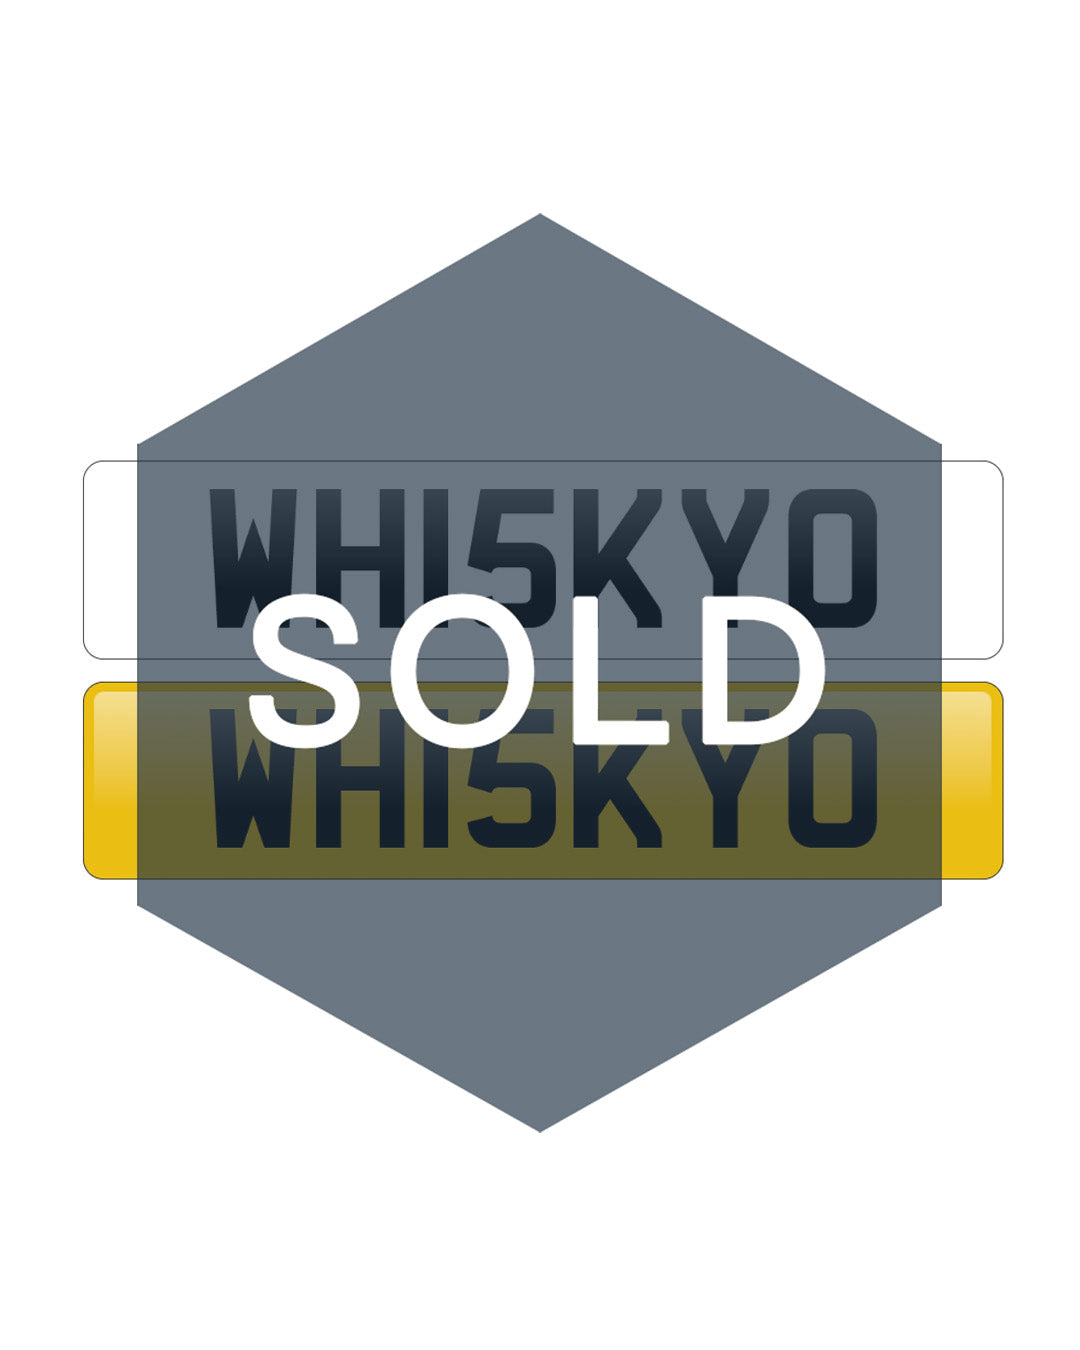 A Whisky Number Plate: WH15KYO